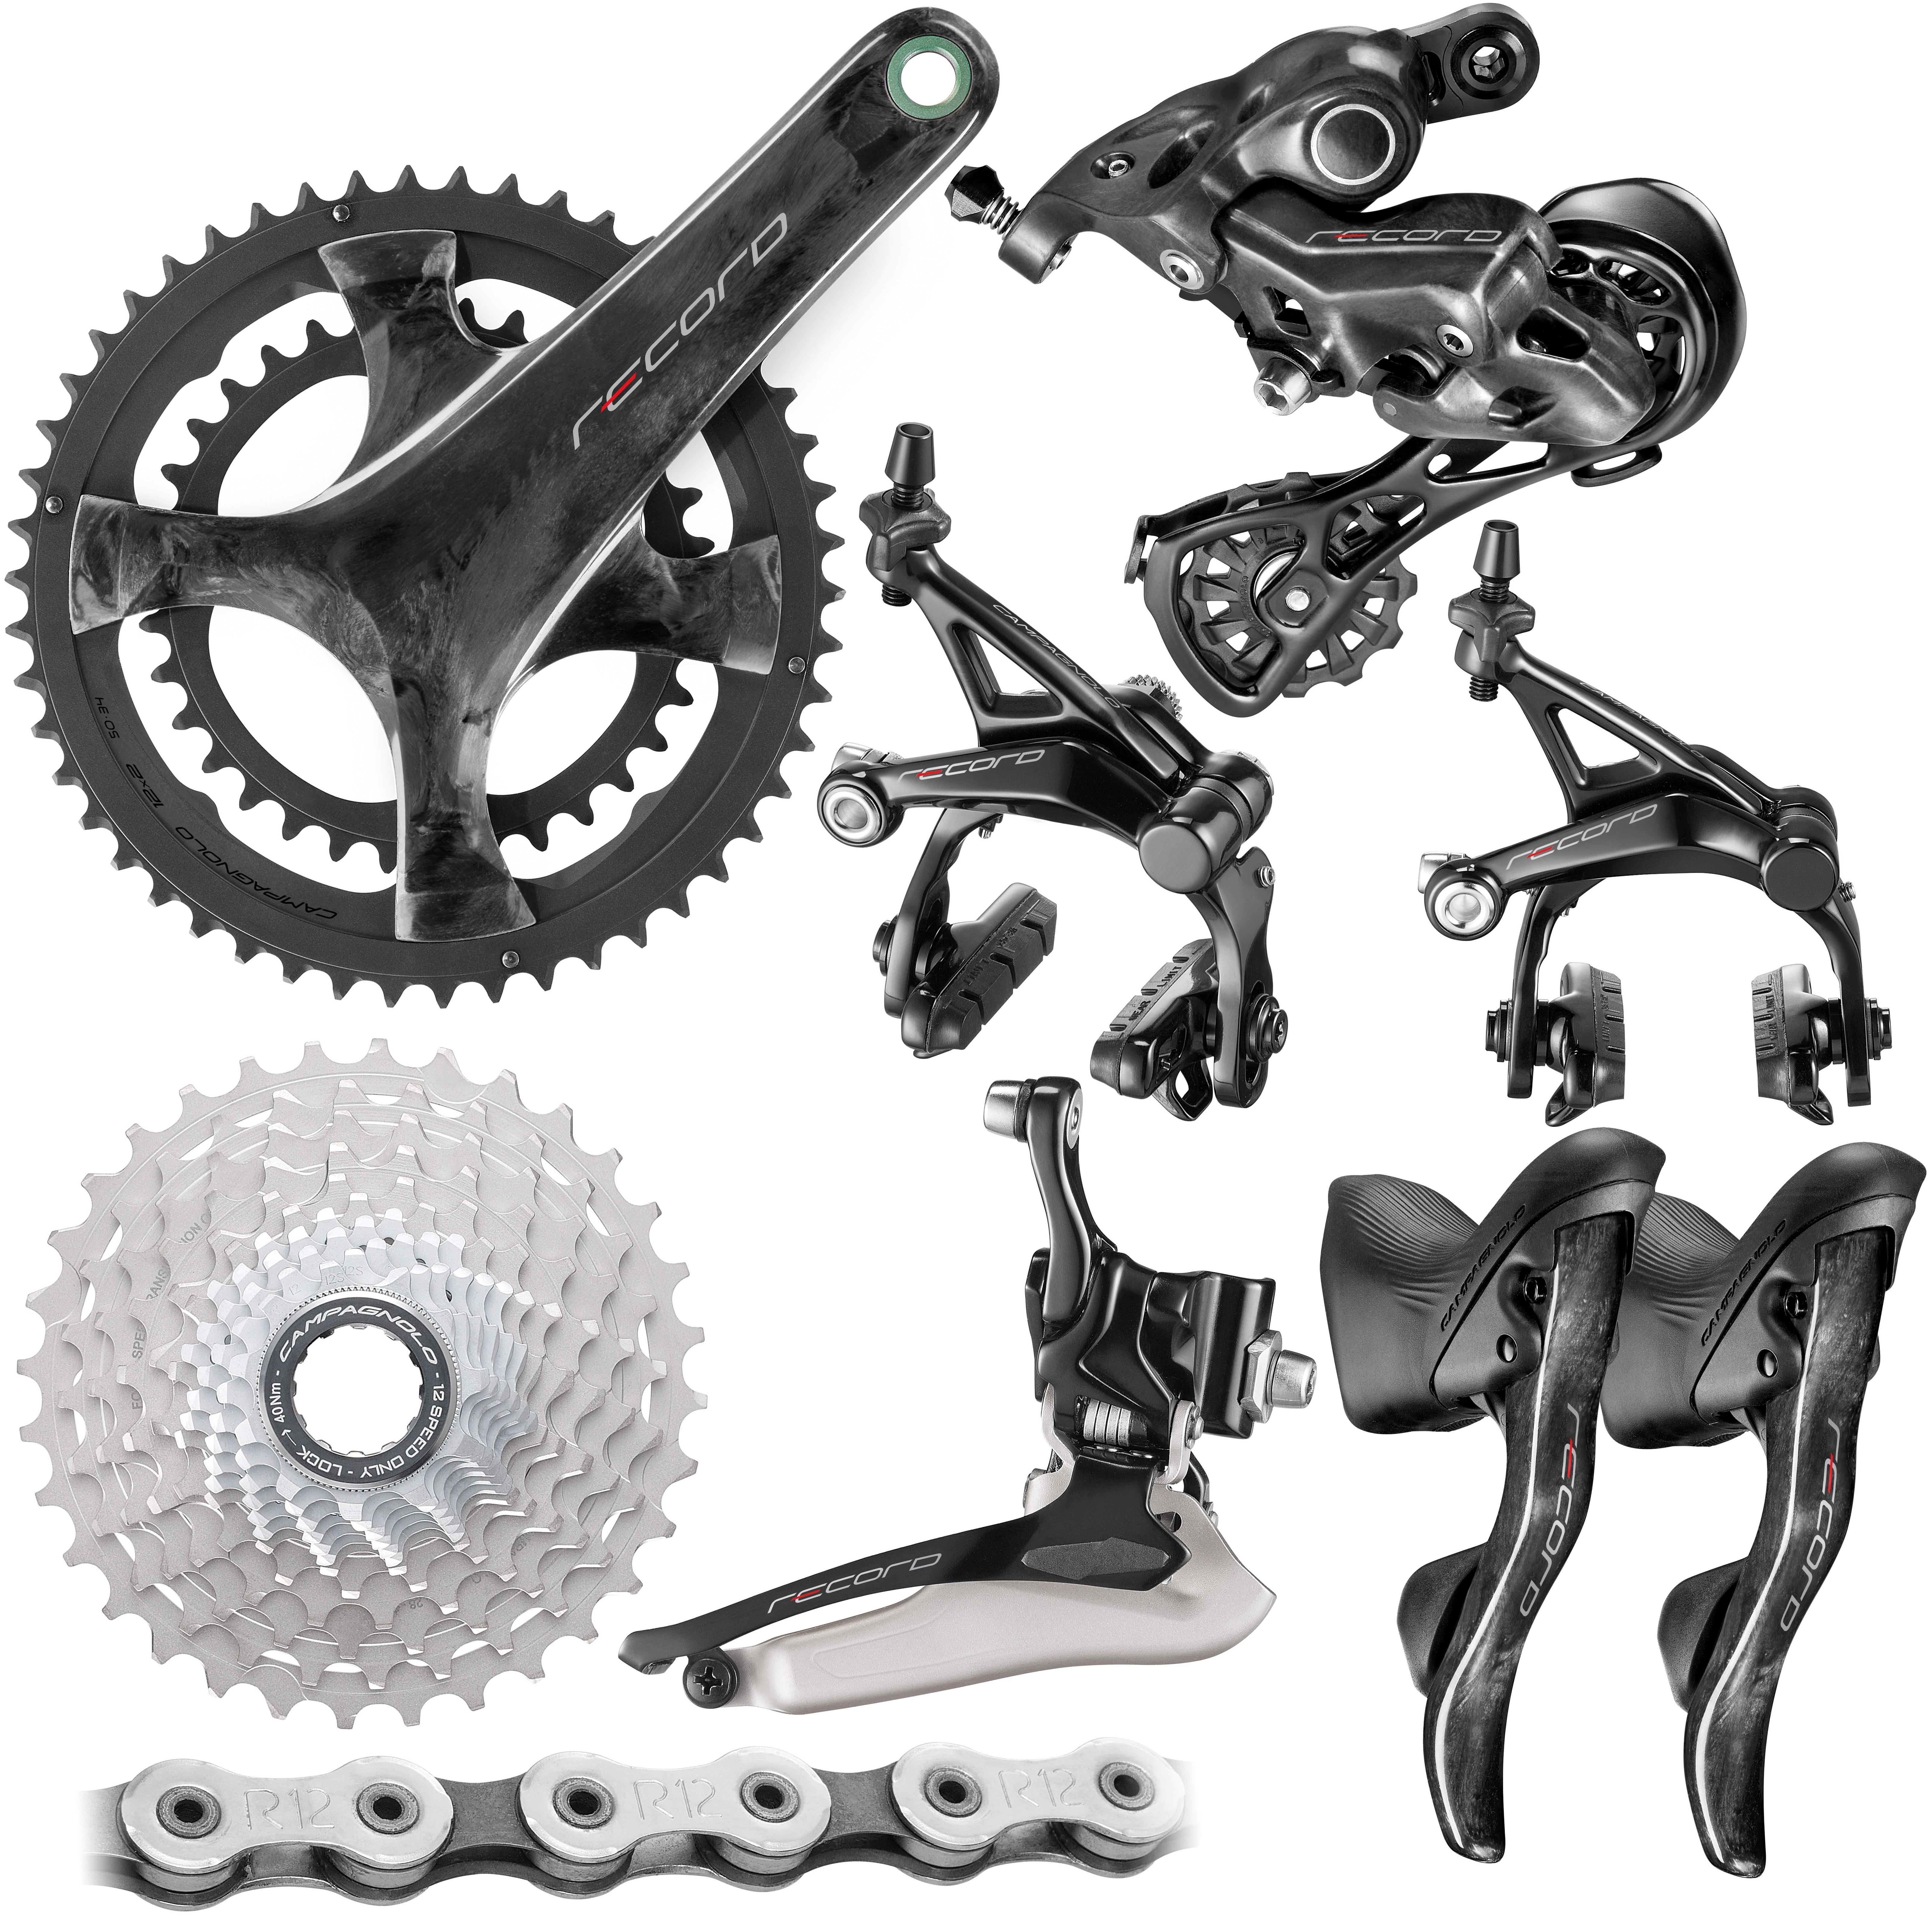 Campagnolo Record Groupset (12 Speed) - Black